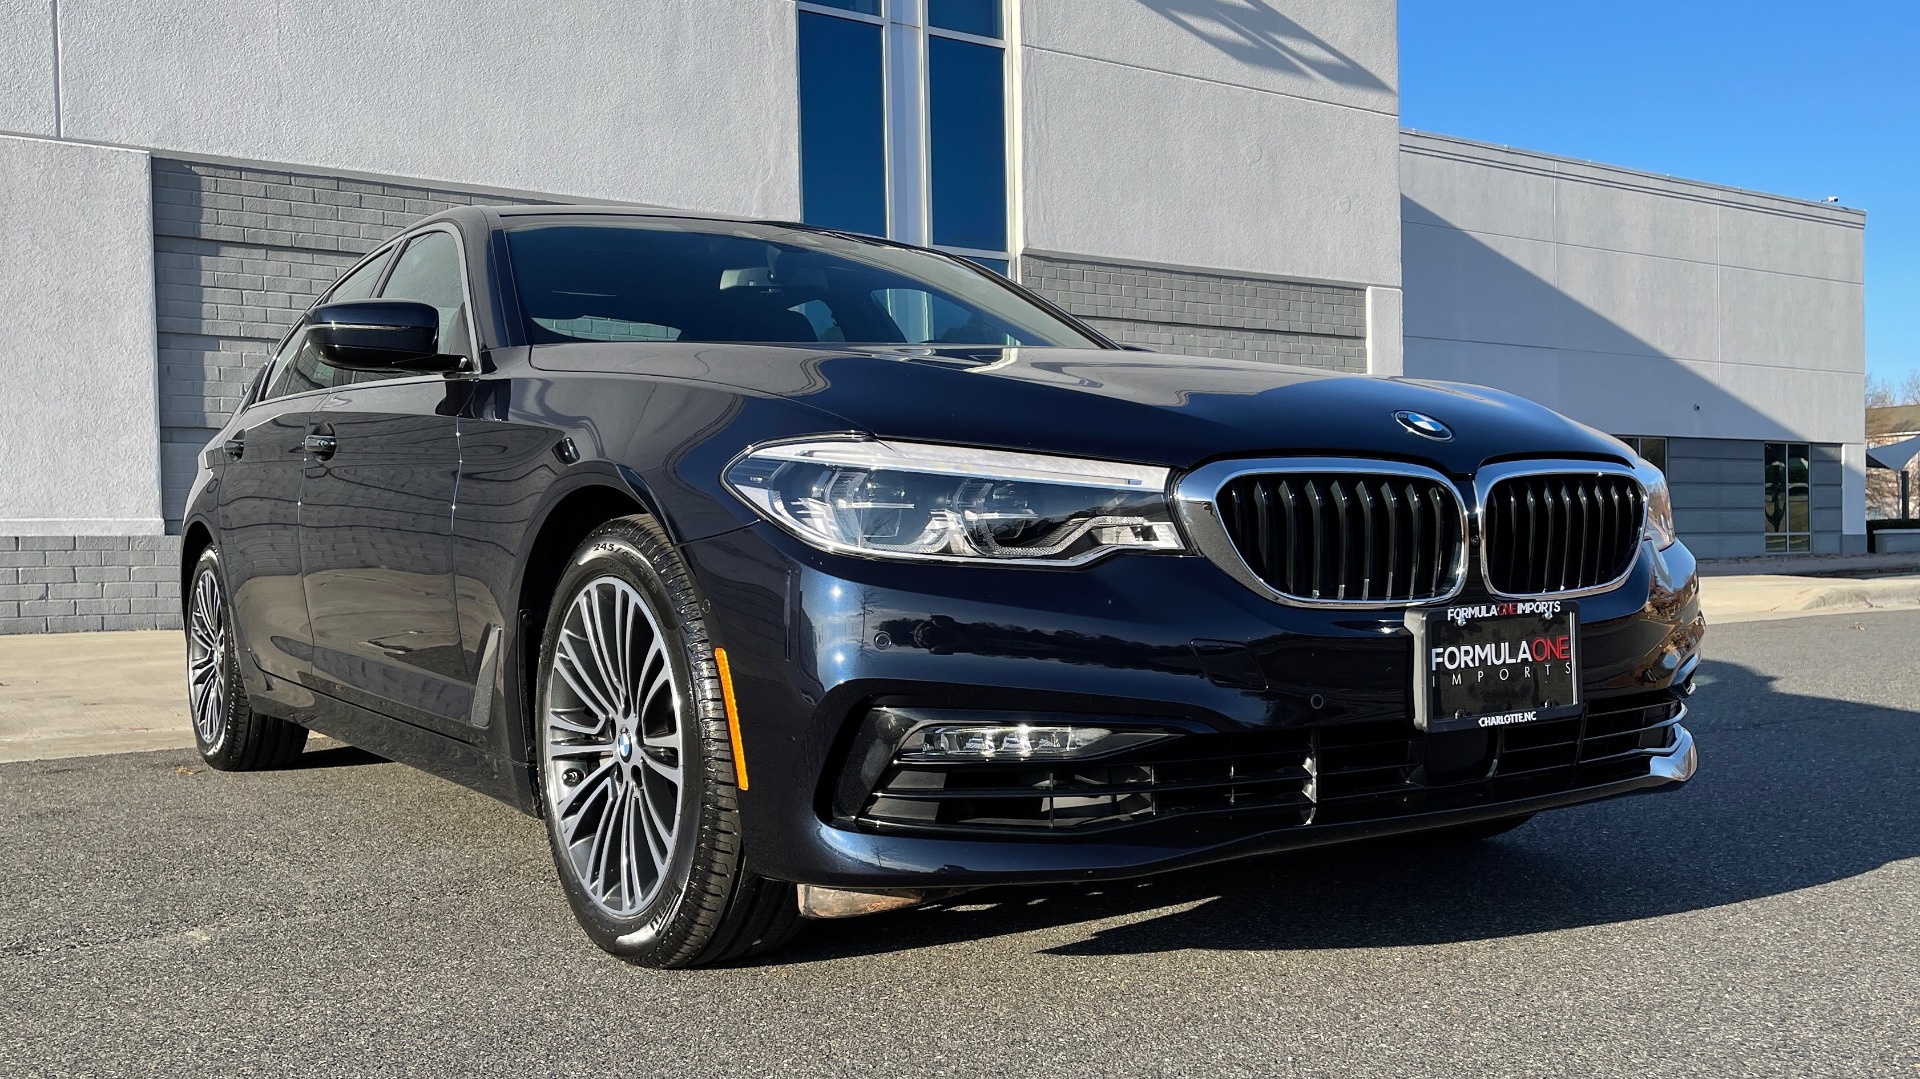 Used 2018 BMW 5 SERIES 530I XDRIVE PREMIUM / EXEC PKG / DRVR ASST PLUS / NAV / REARVIEW for sale Sold at Formula Imports in Charlotte NC 28227 6